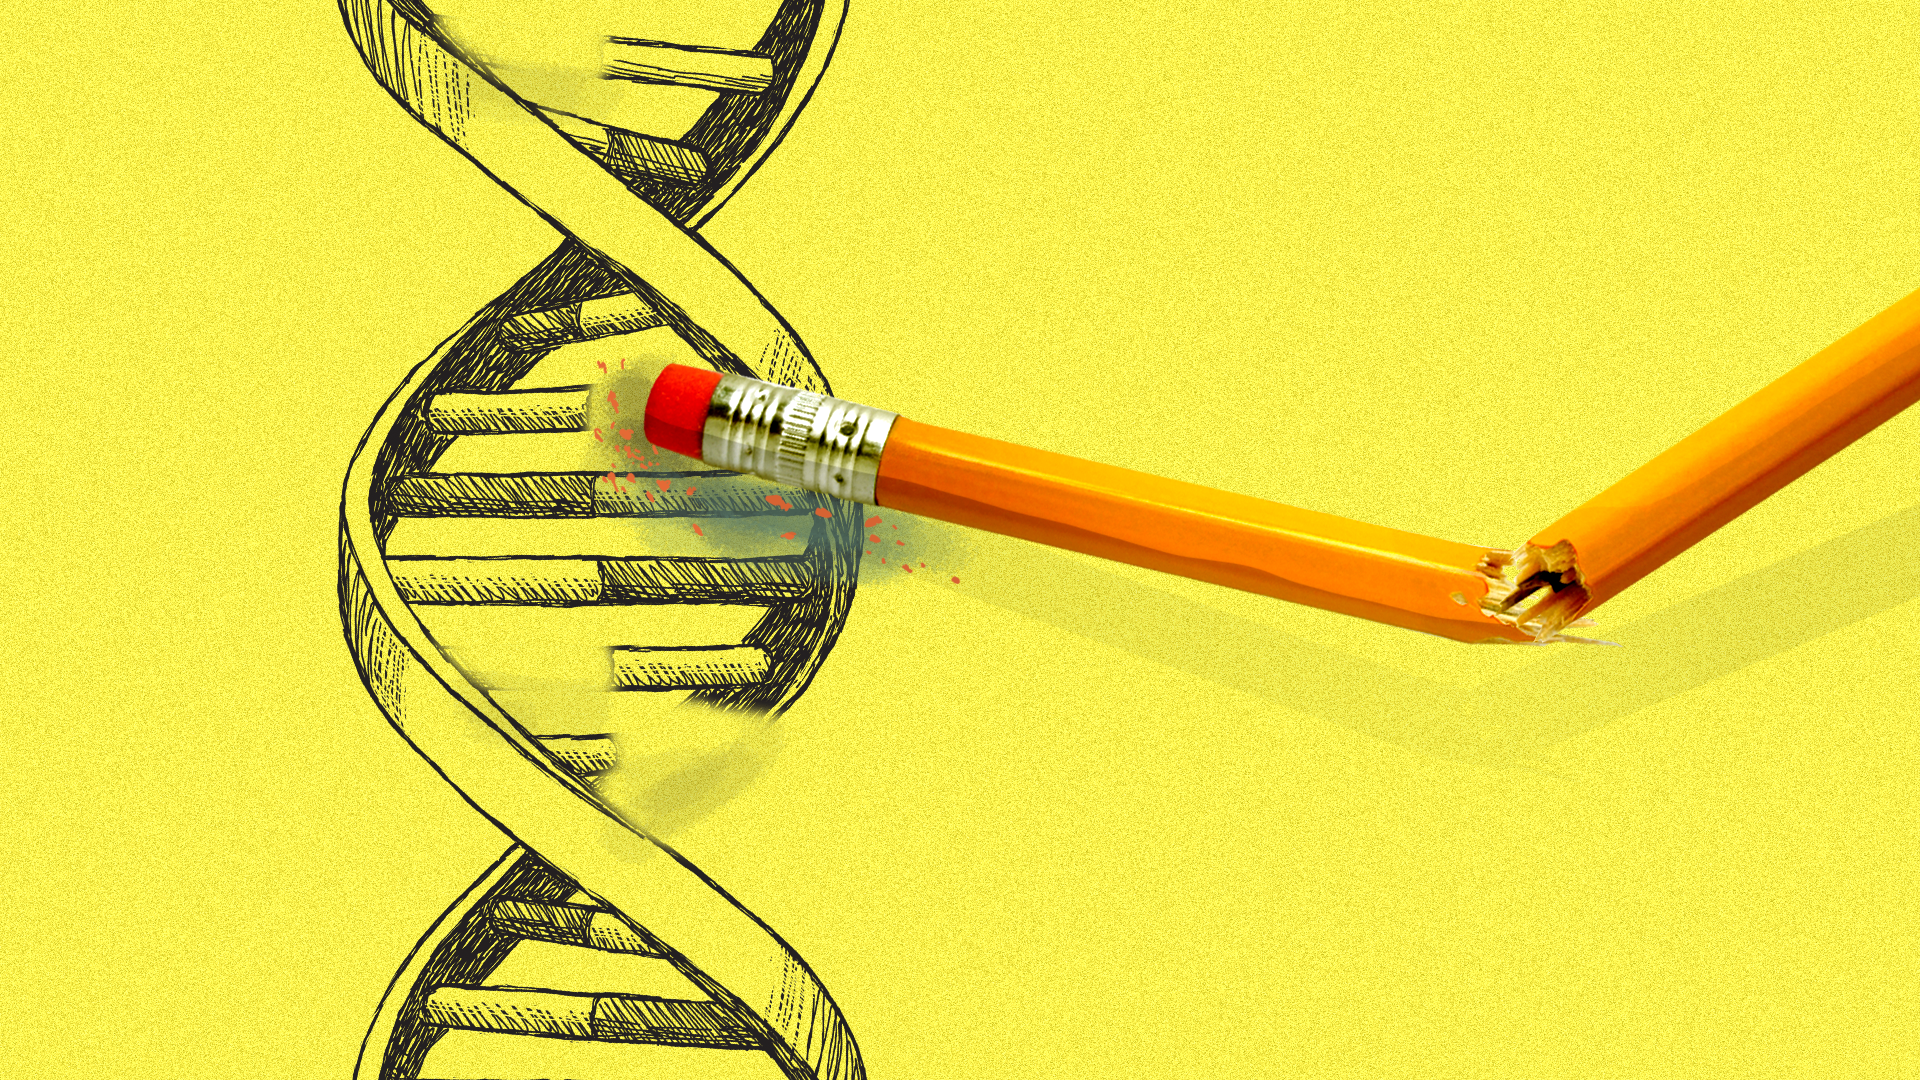 Illustration of a double stranded DNA helix with a broken pencil erasing part of one strand